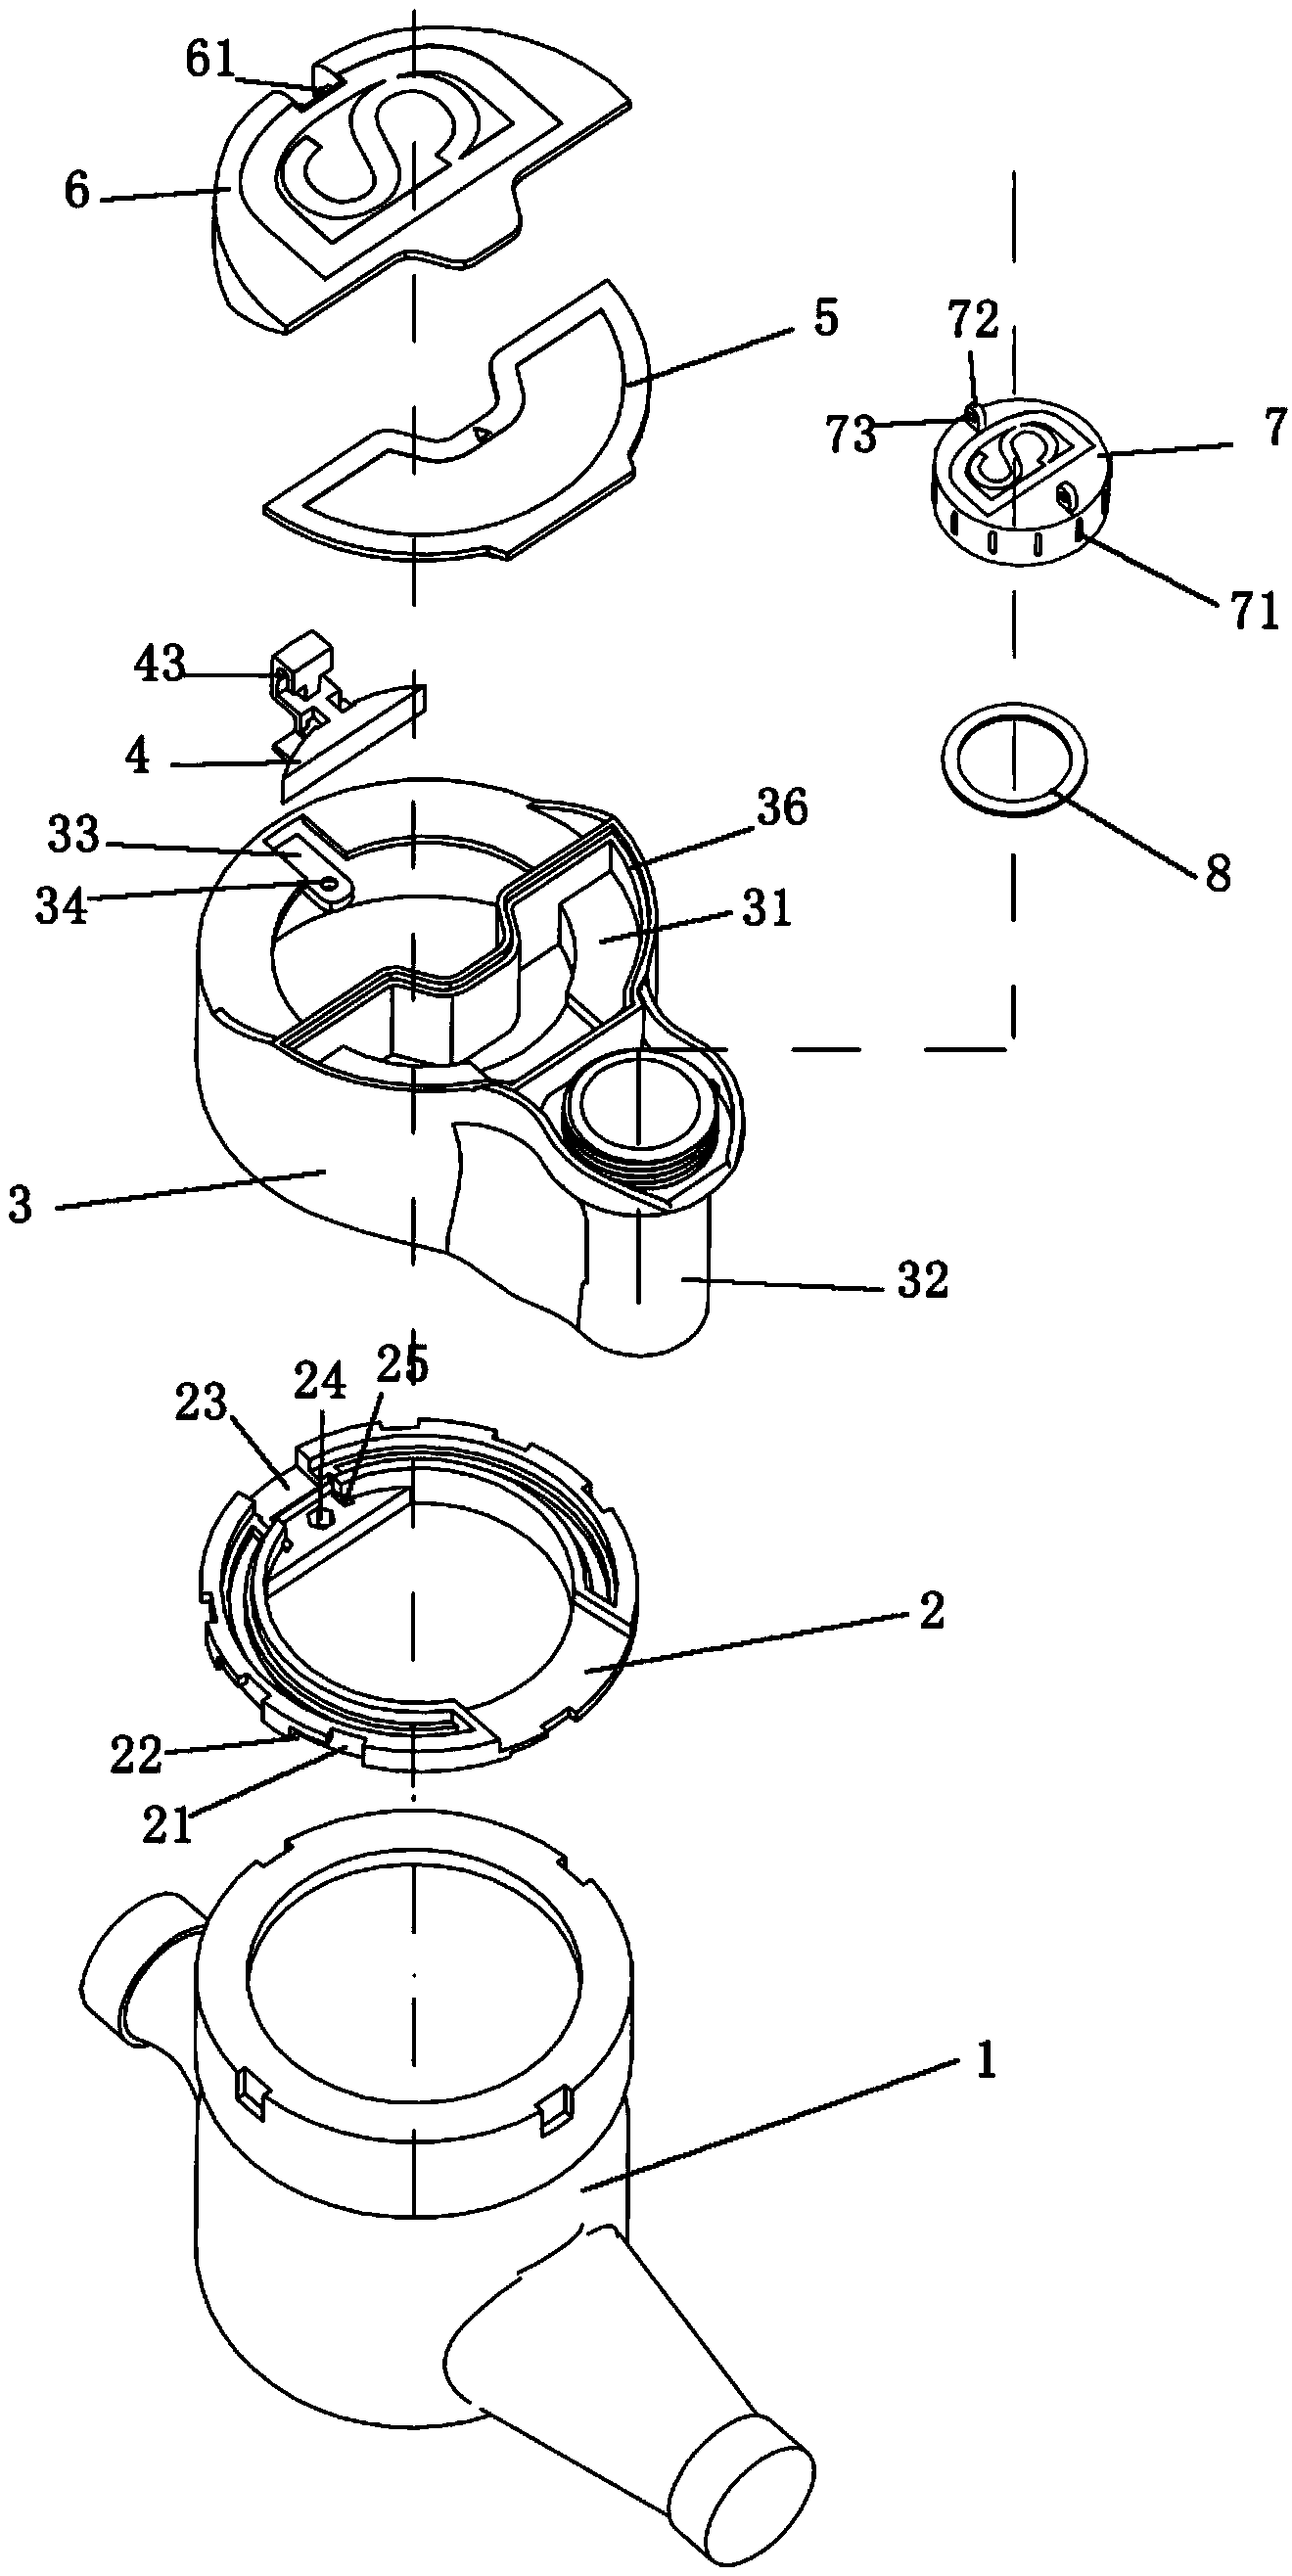 Split type water meter provided with seal chamber